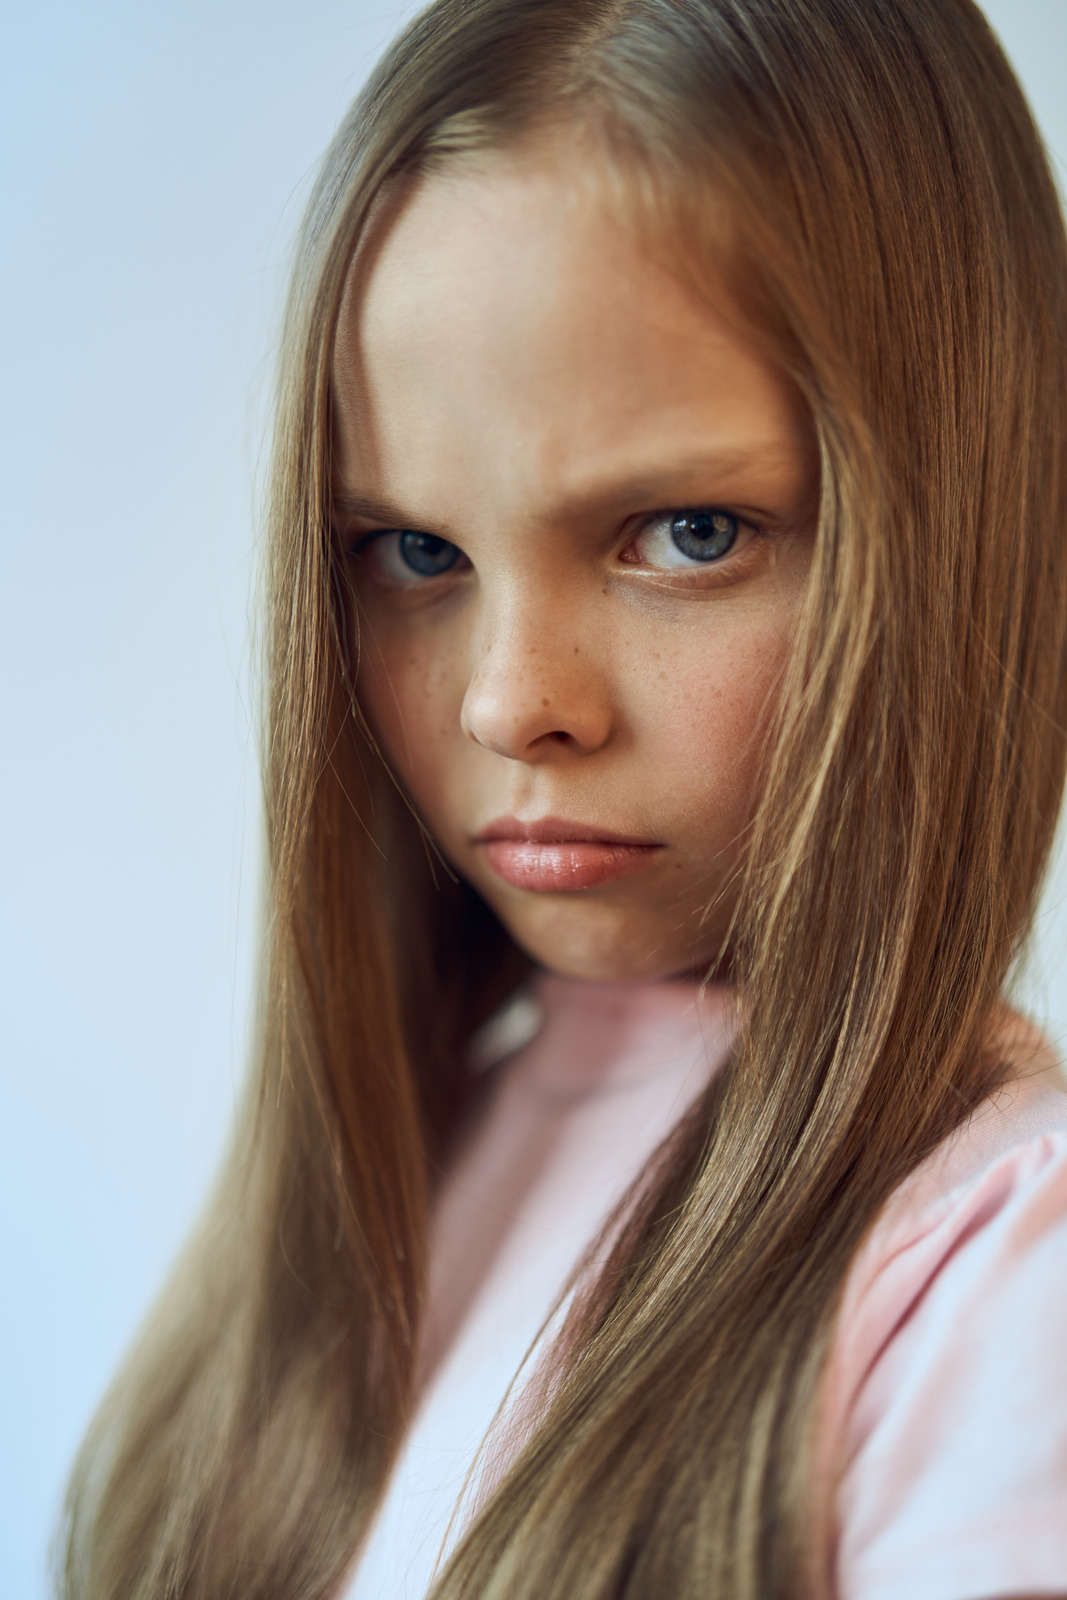 Girl With An Unhappy Expression On Her Face White T Shirt Resentment Emotions Photos By Canva